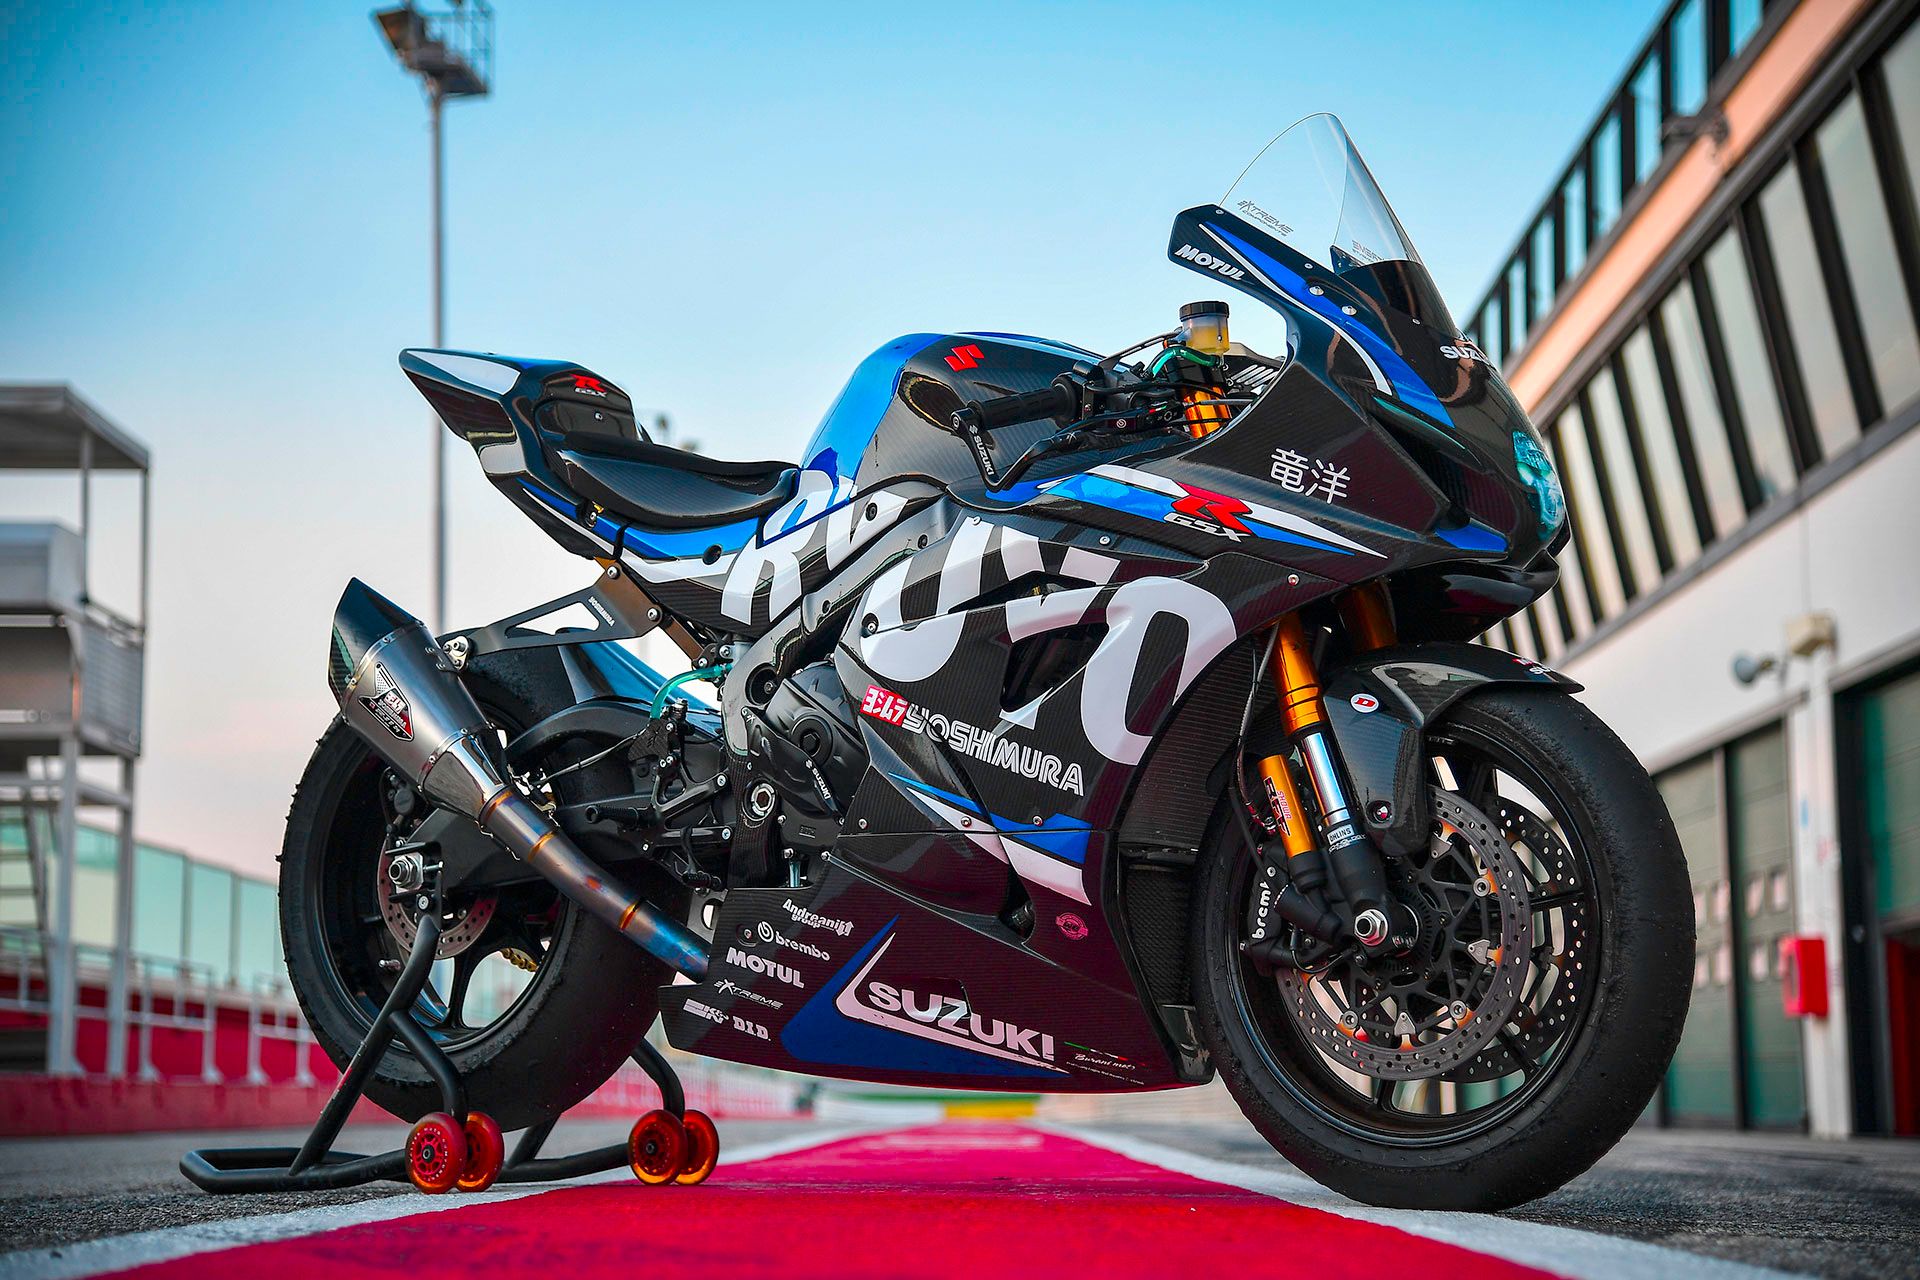 Suzuki showcases its most lethal GSXR1000R yet. It's called the "Ryuyo"